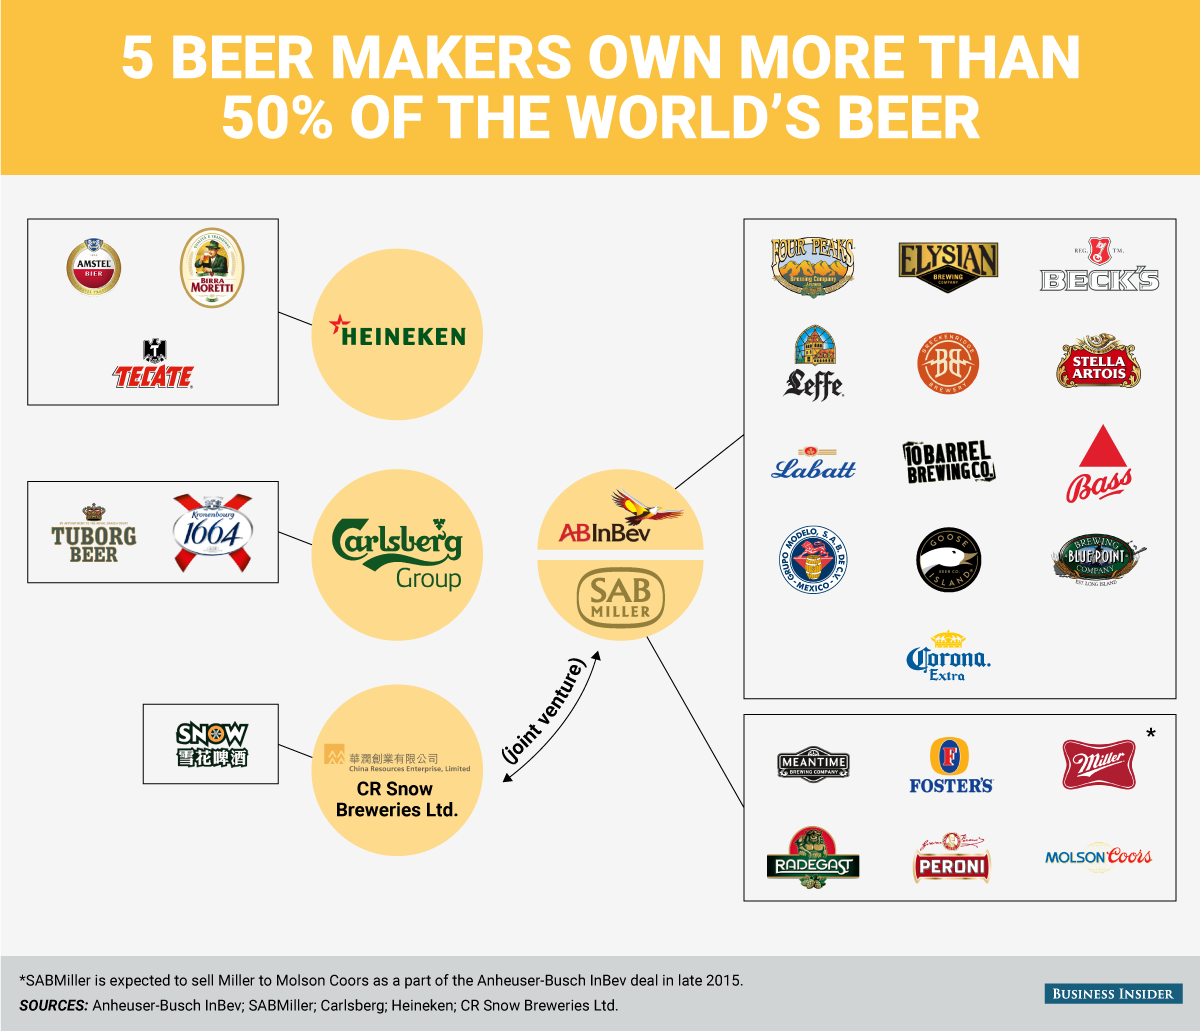 These 5 beer makers own more than half of the world’s beer